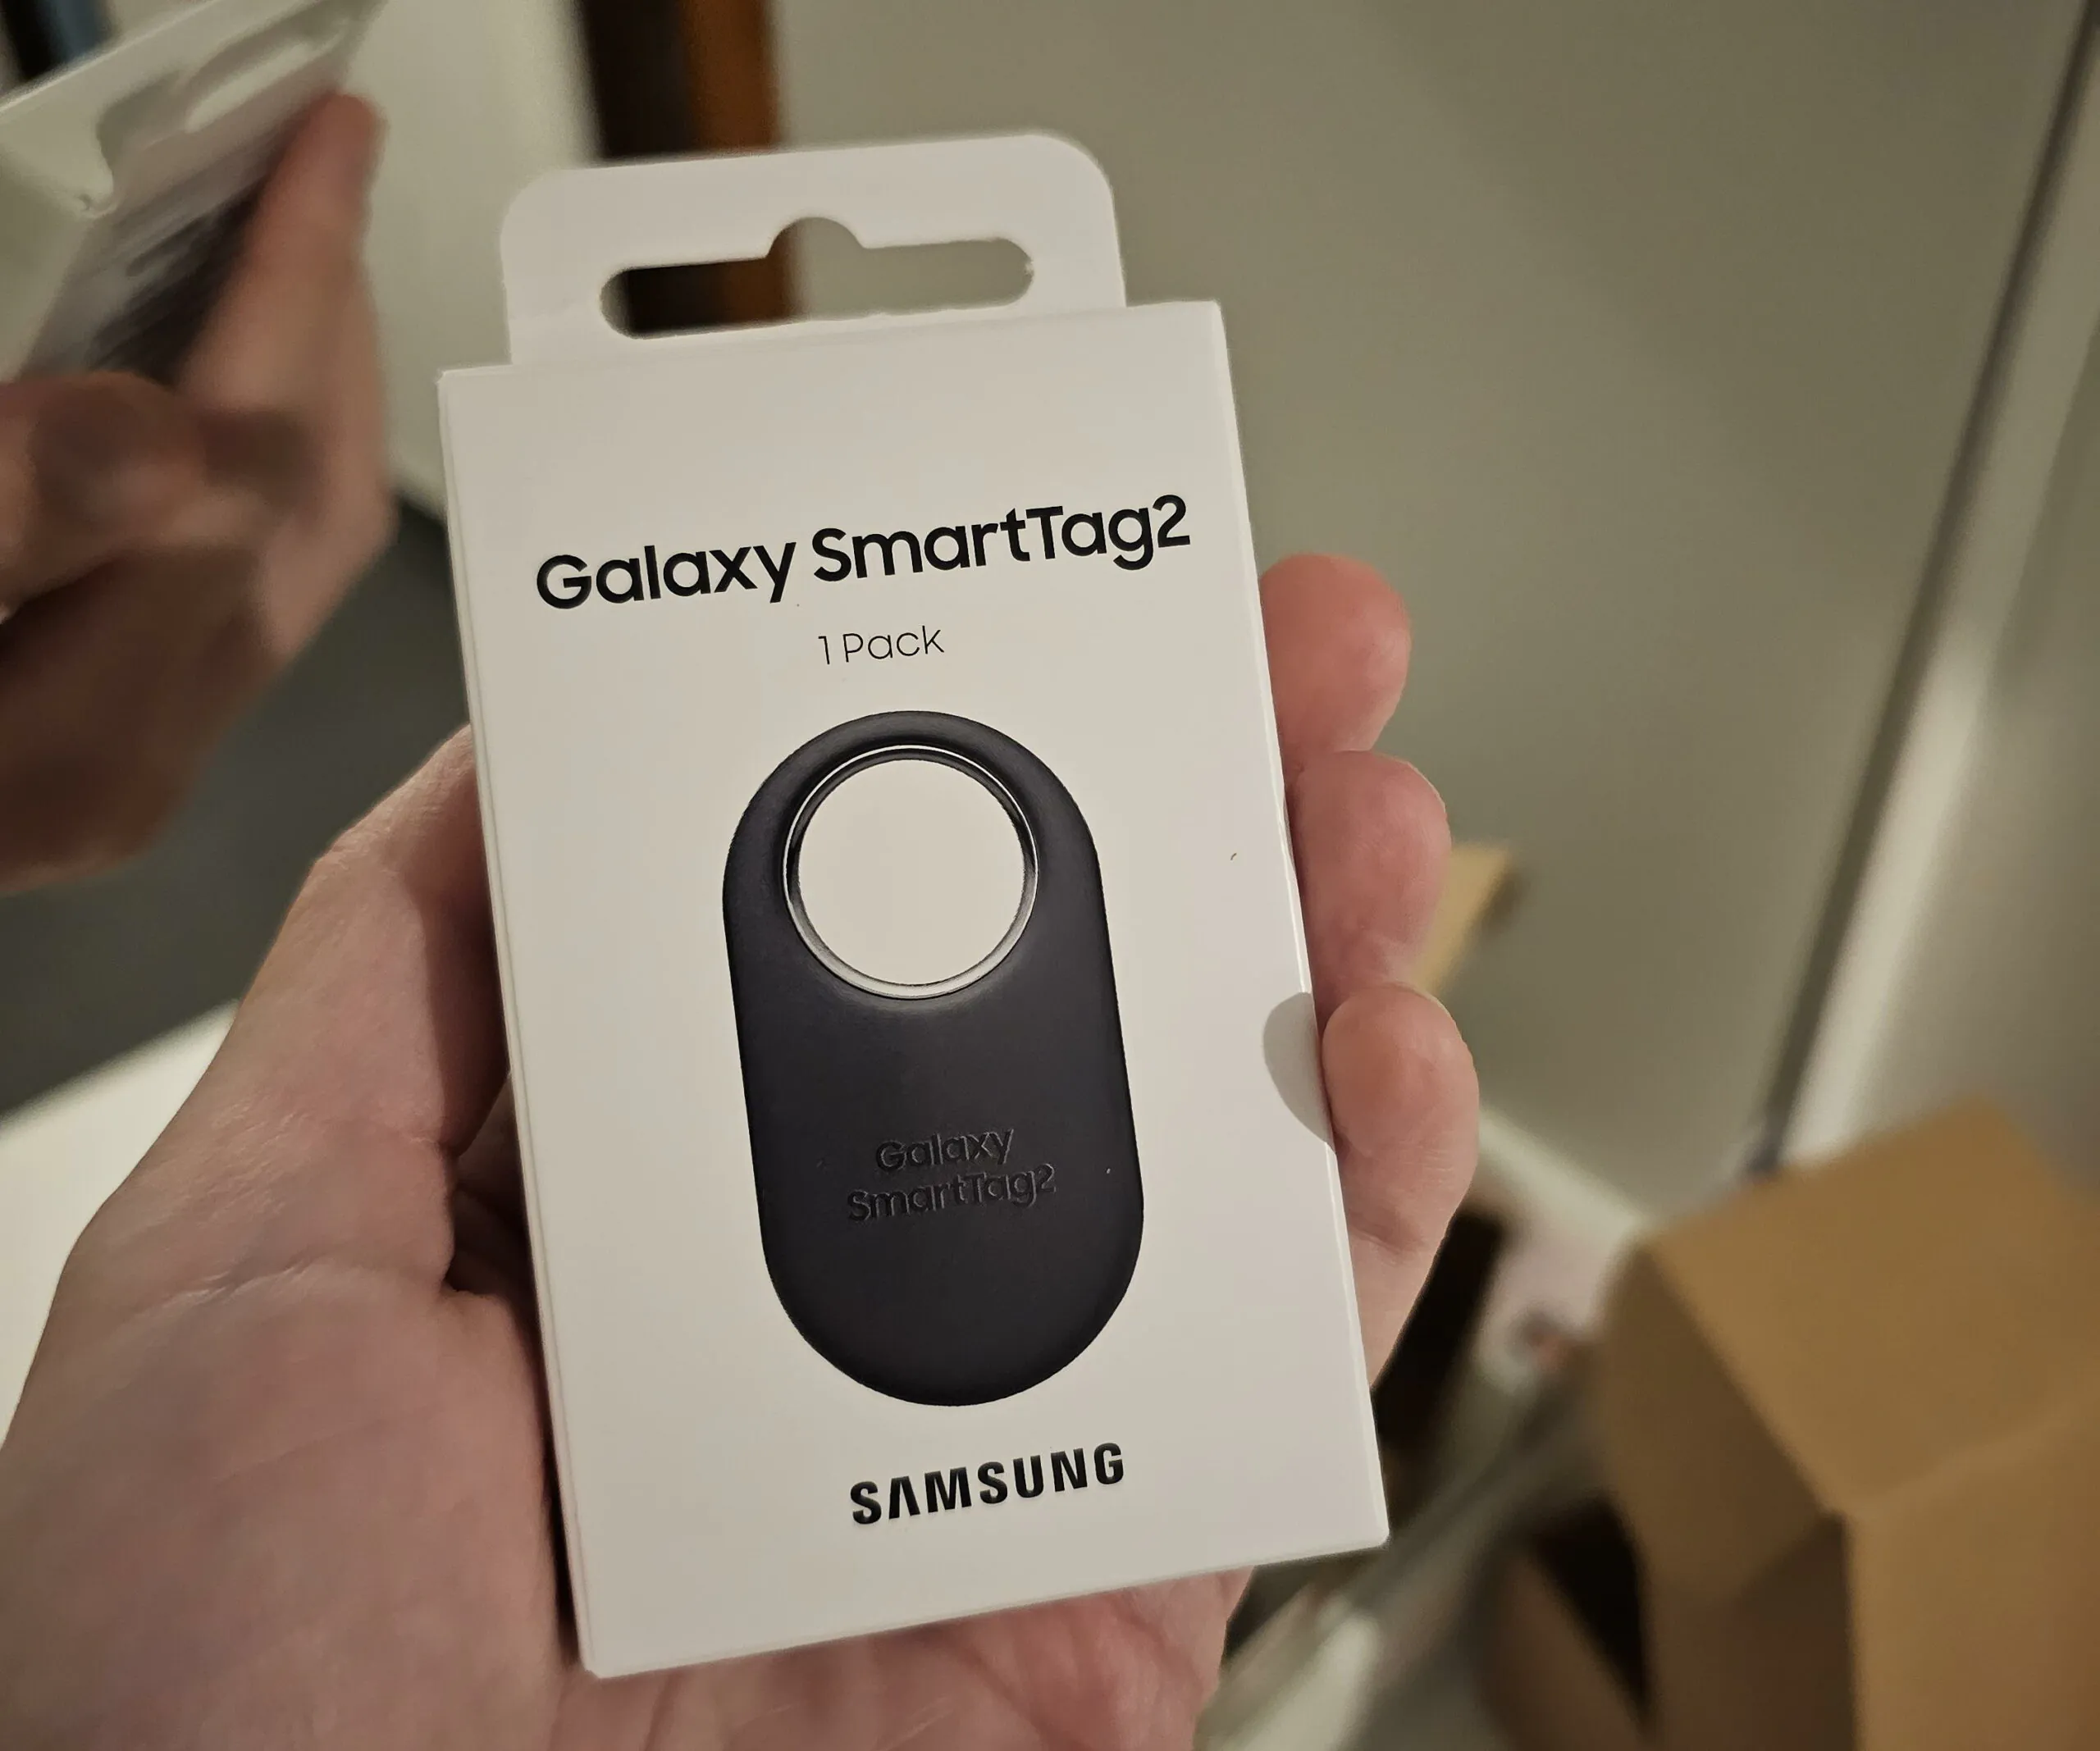 I Traveled With the New Samsung Galaxy SmartTag2—Here's How it